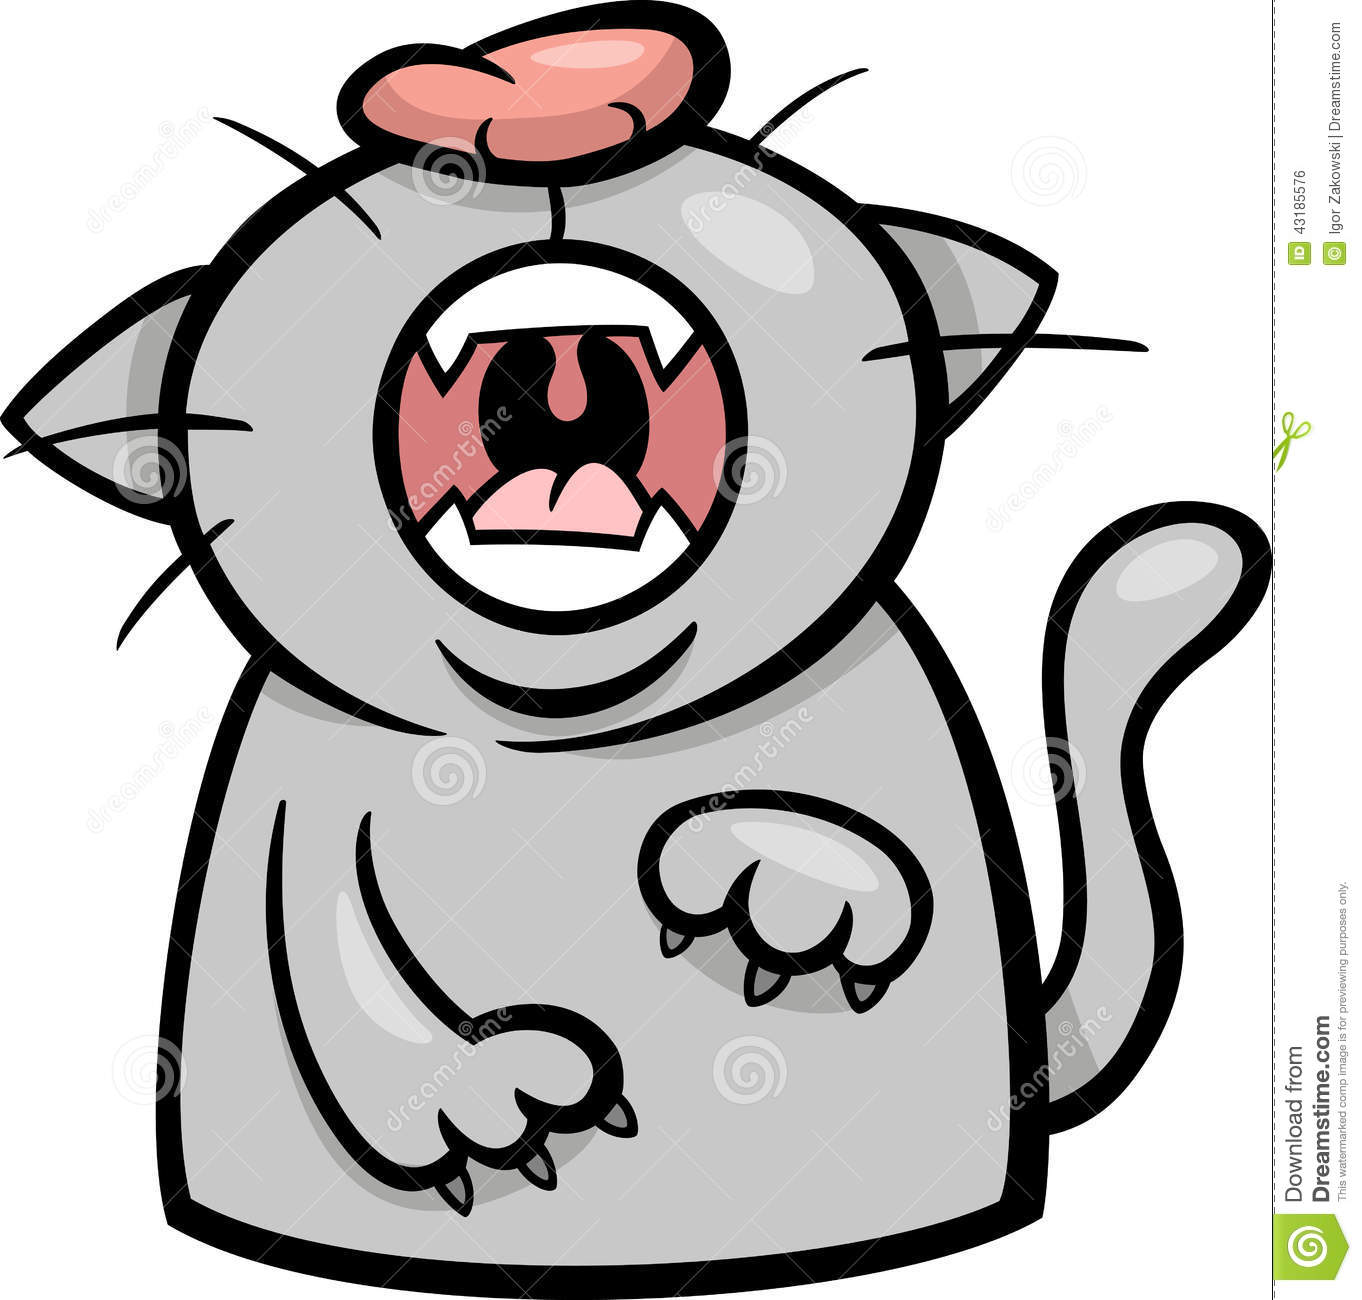 cat meowing clipart - photo #9